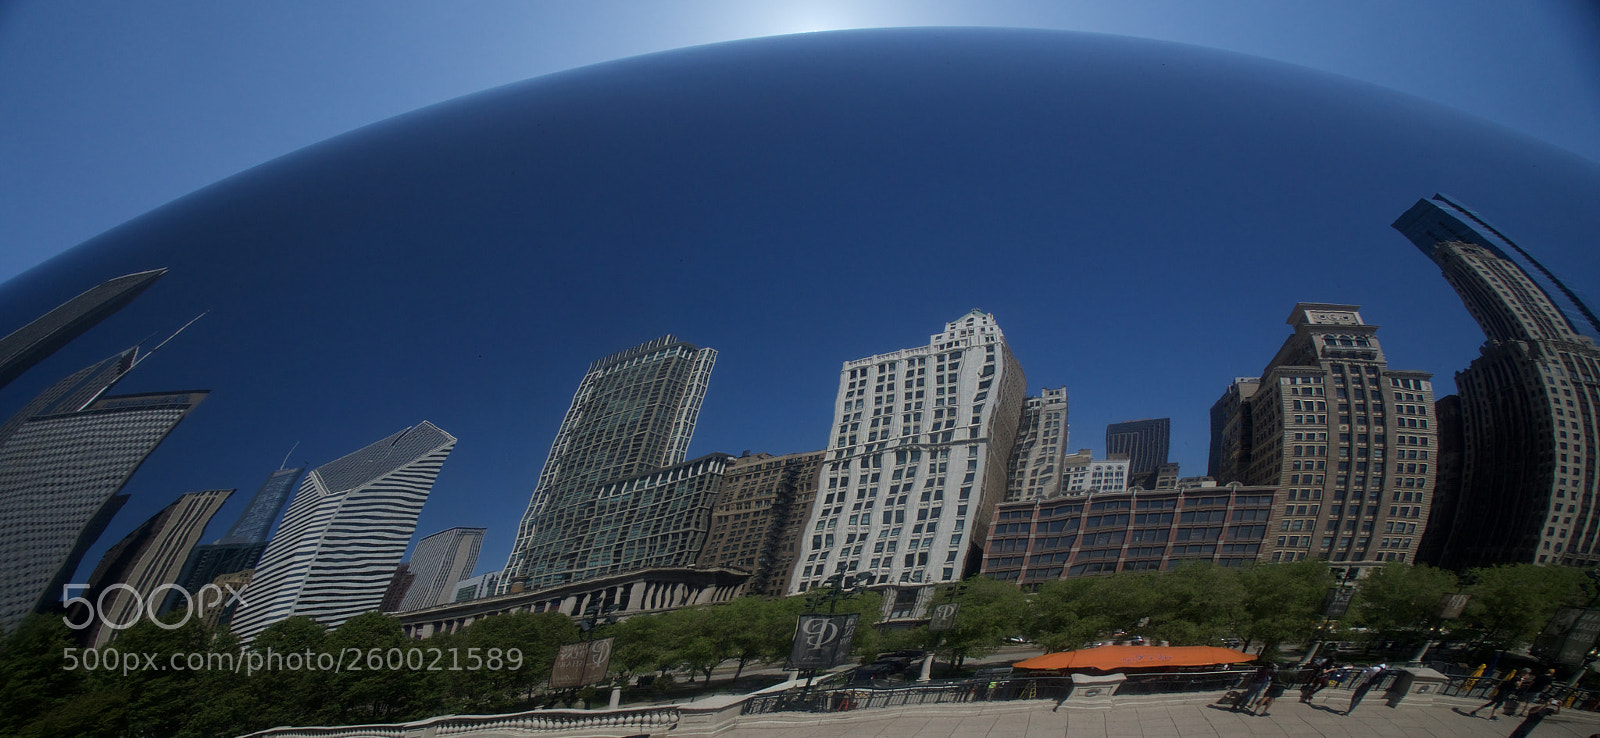 Sony a6300 sample photo. Chicago's bean photography